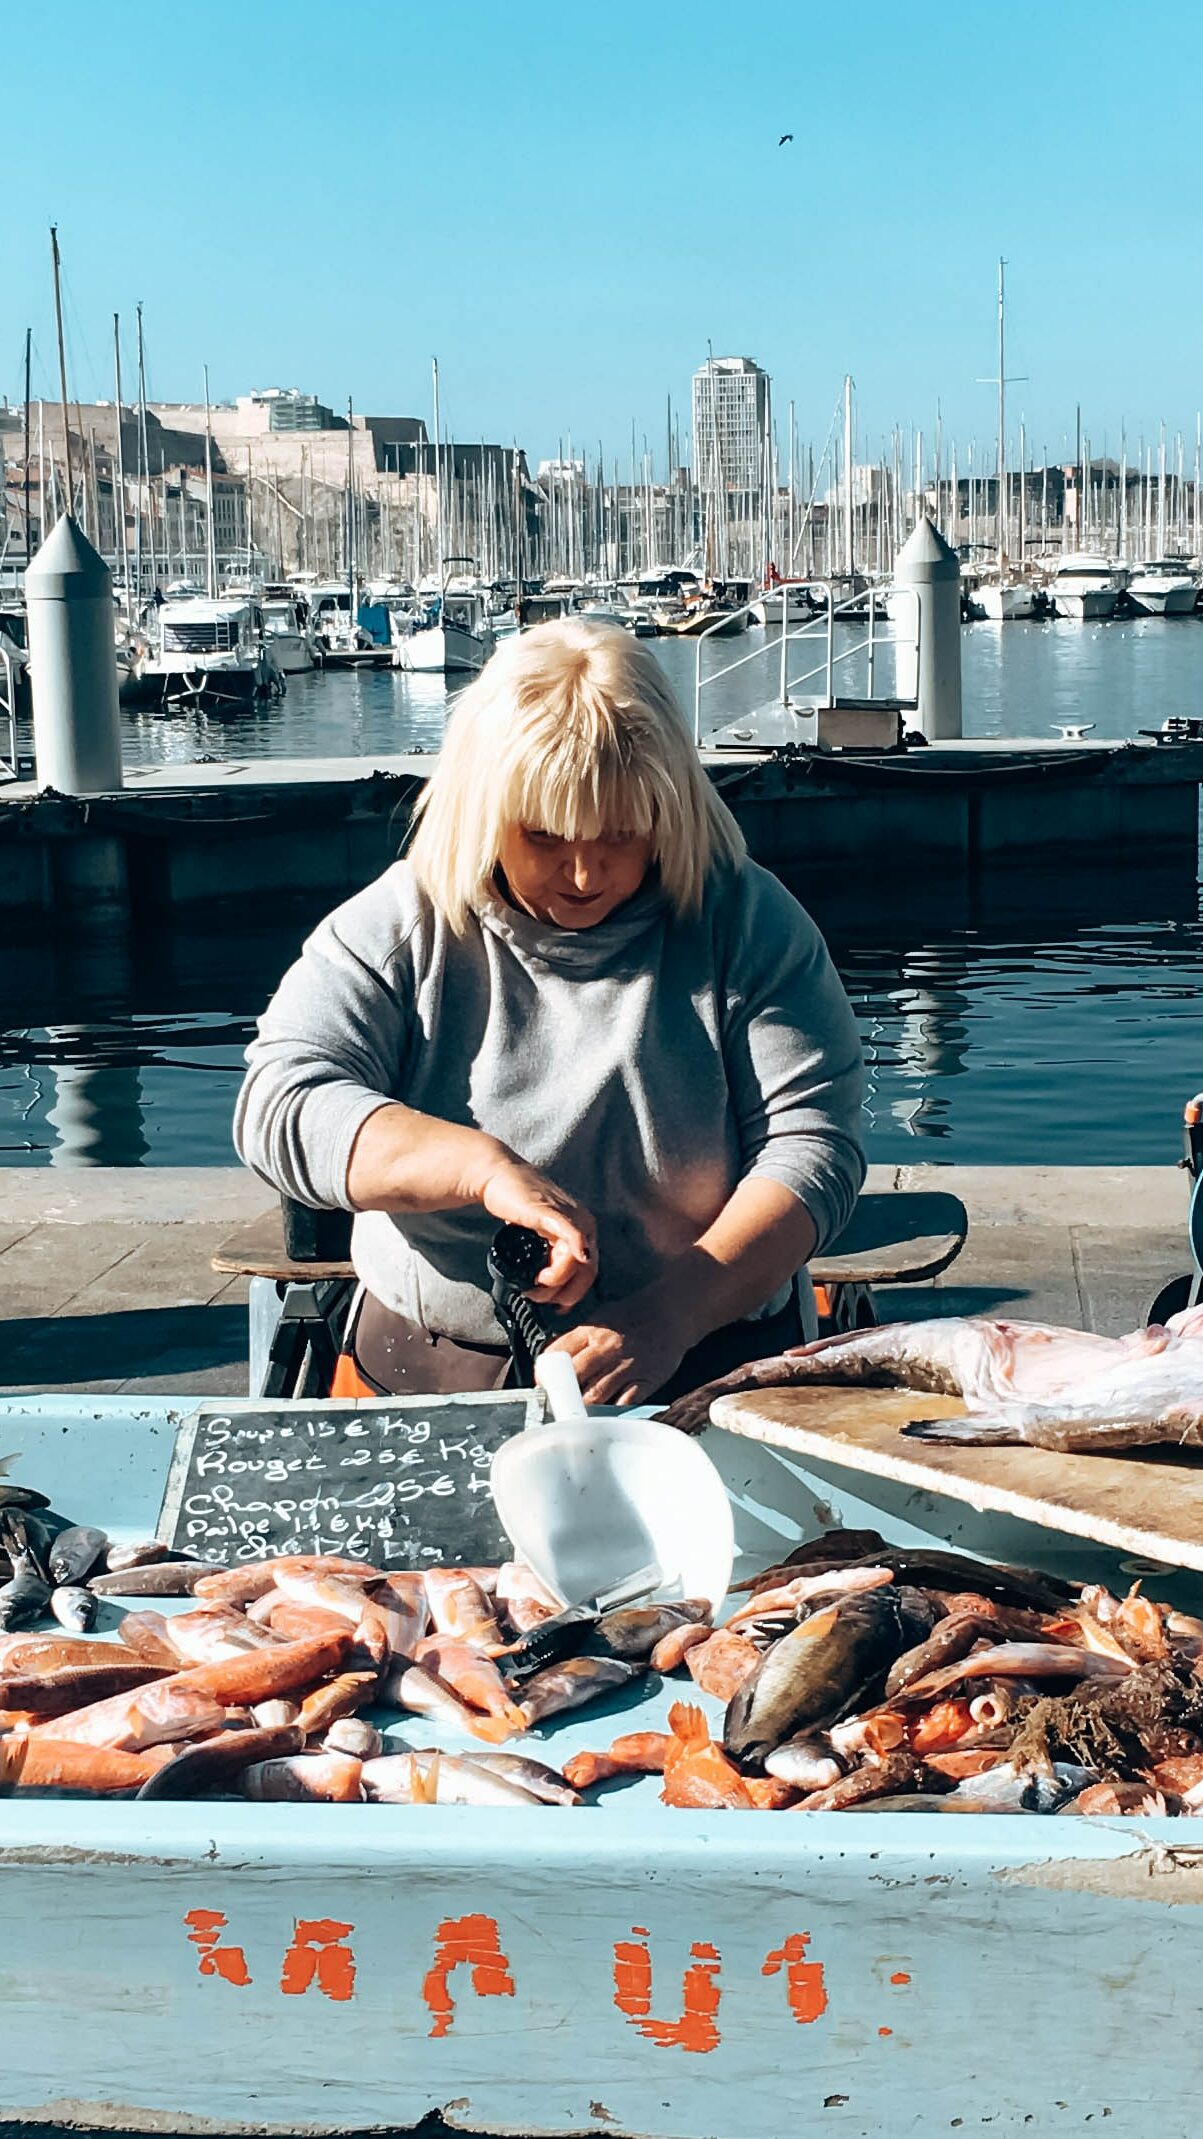 Seafood selling by the sea in Marseille